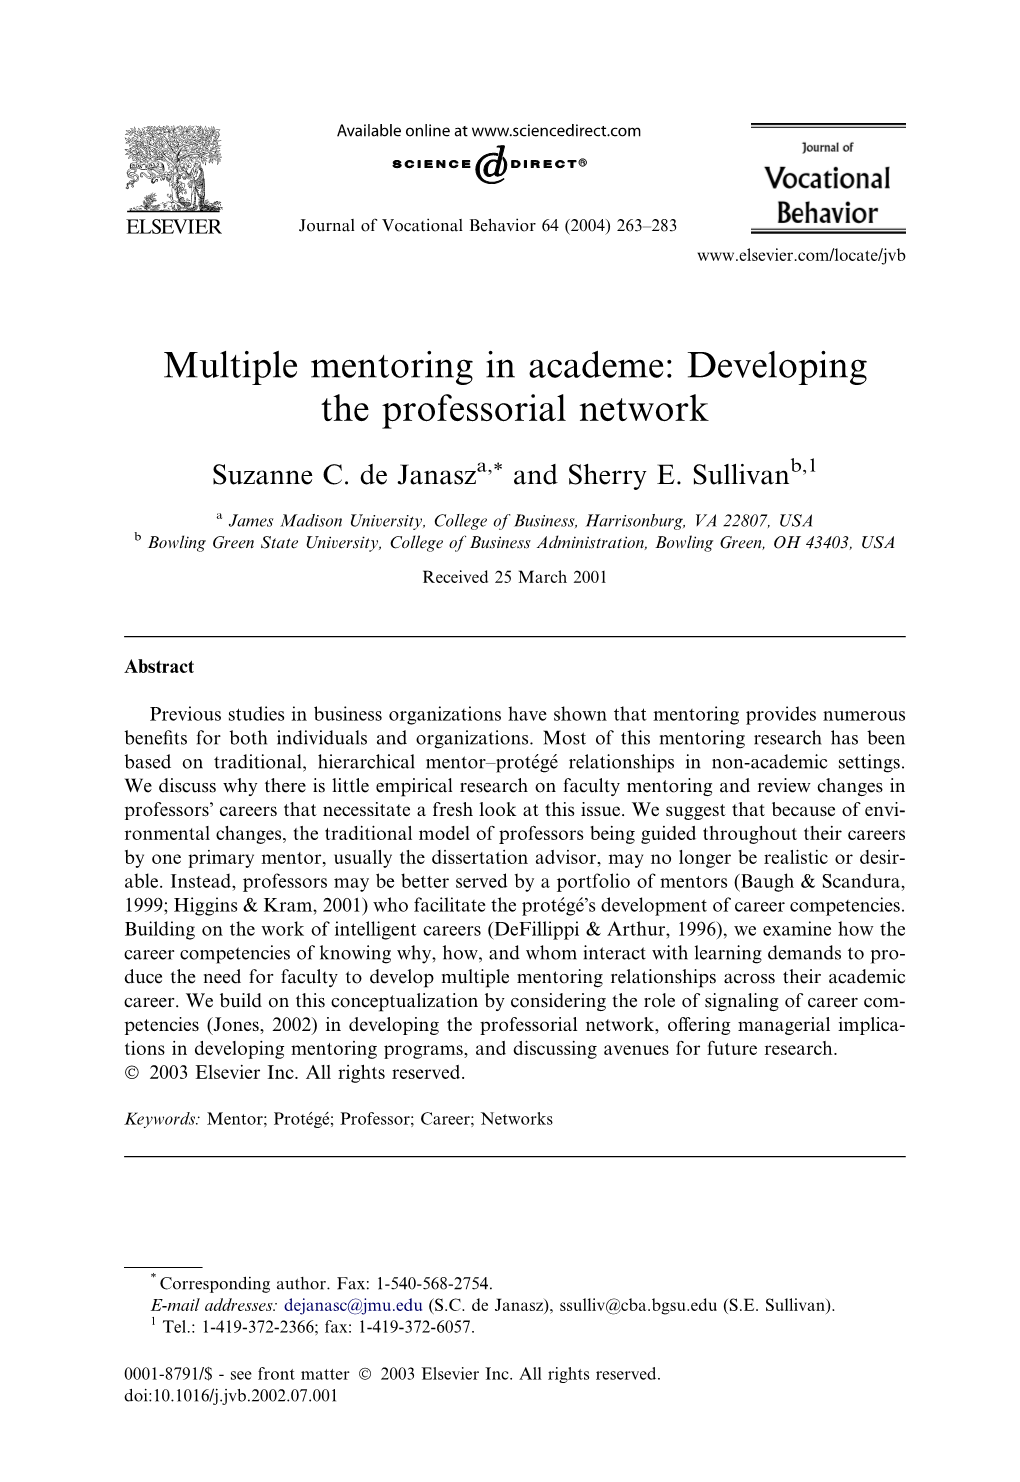 Multiple Mentoring in Academe: Developing the Professorial Network